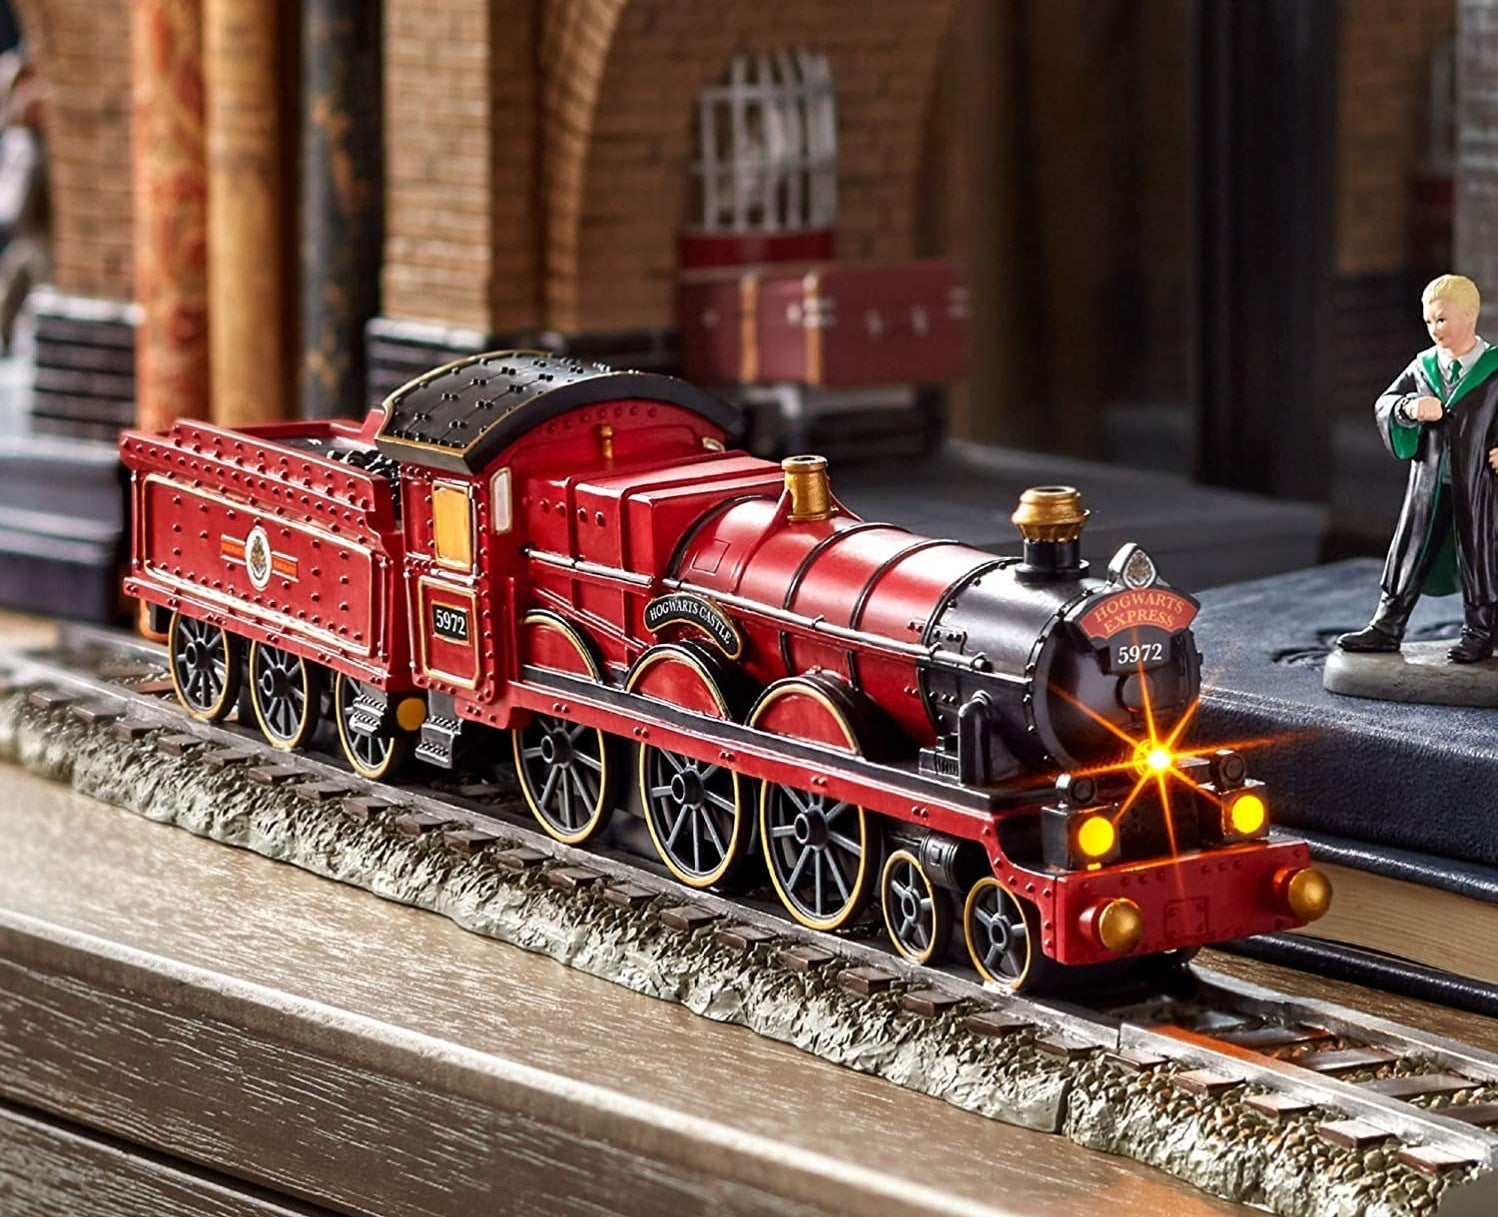 the red Howarts Express train 